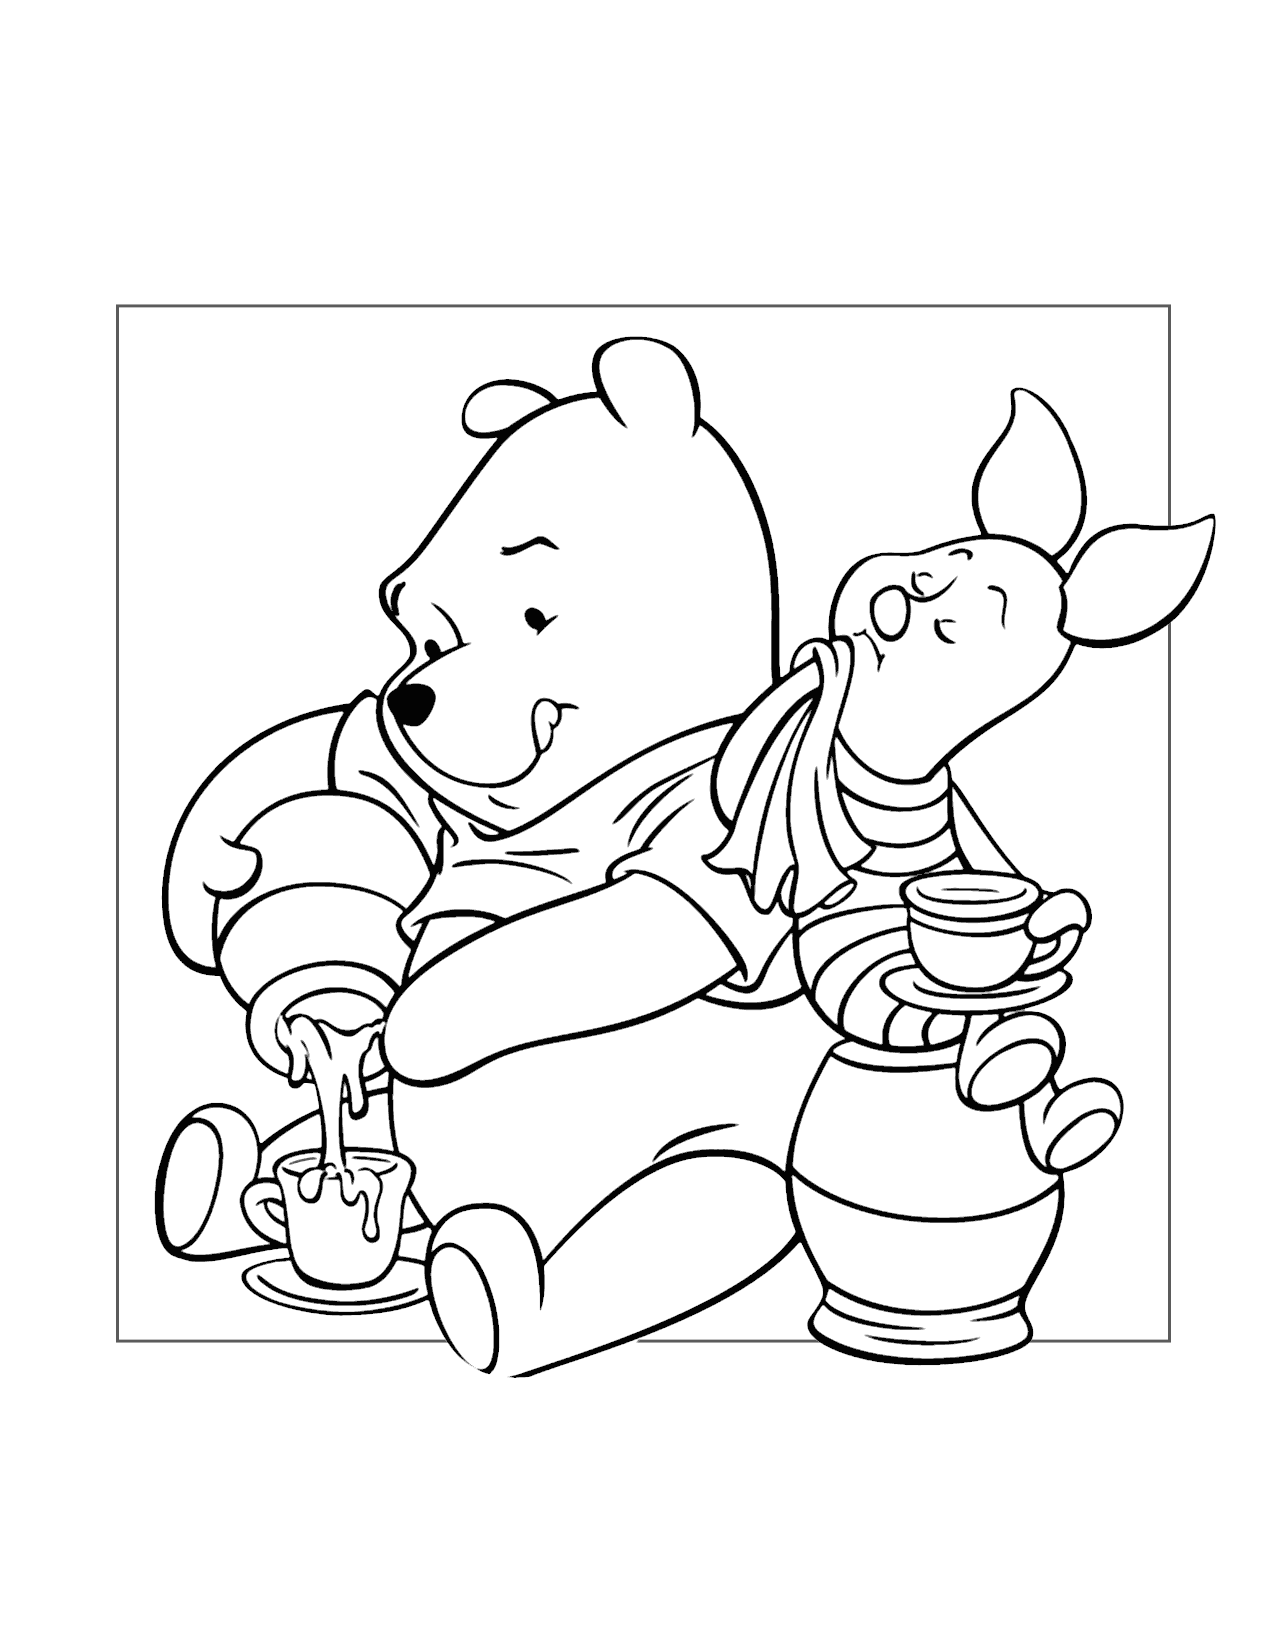 Pooh And Piglet Eat Honey Coloring Page